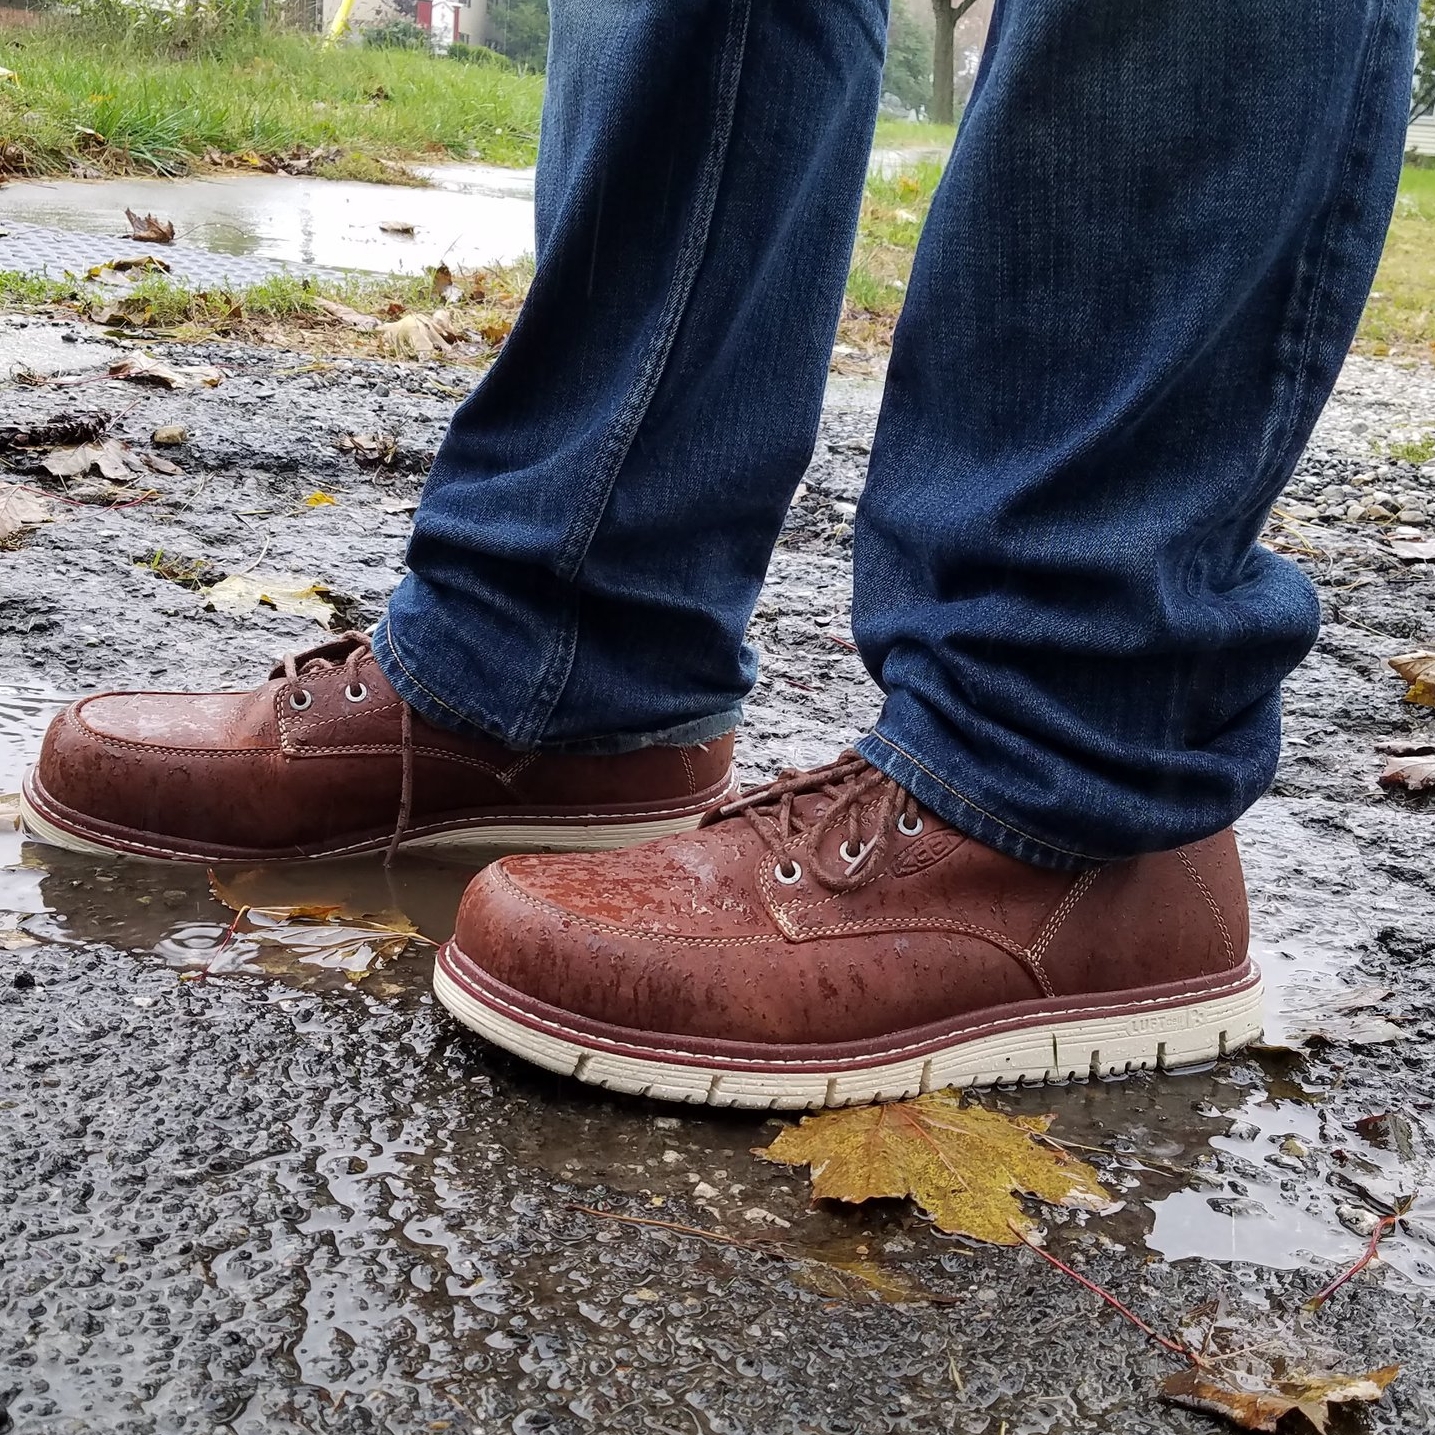 utility work boots